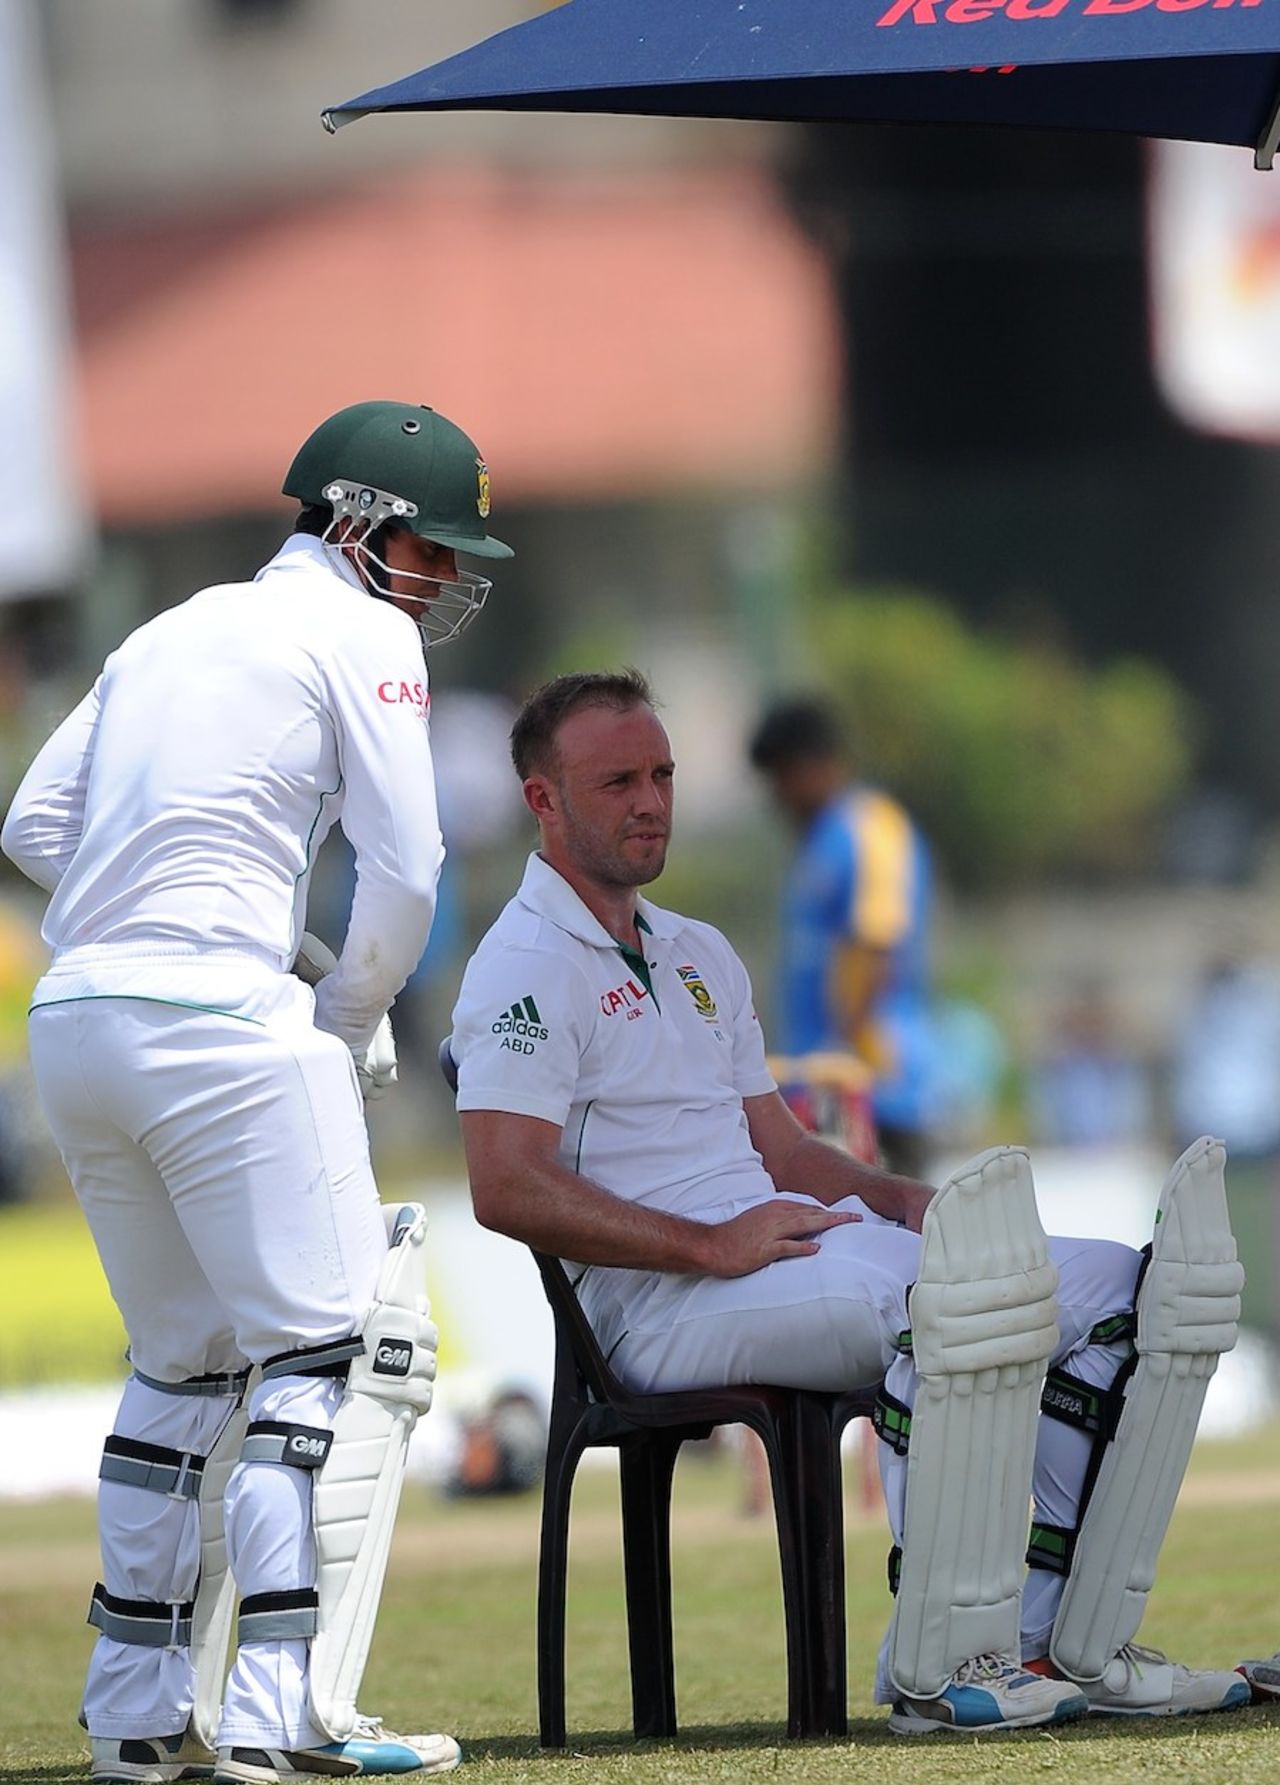 AB de Villiers takes a breather during the drinks break while Quinton de Kock does some shadow practice, Sri Lanka v South Africa, 1st Test, Galle, 4th day, July 19, 2014